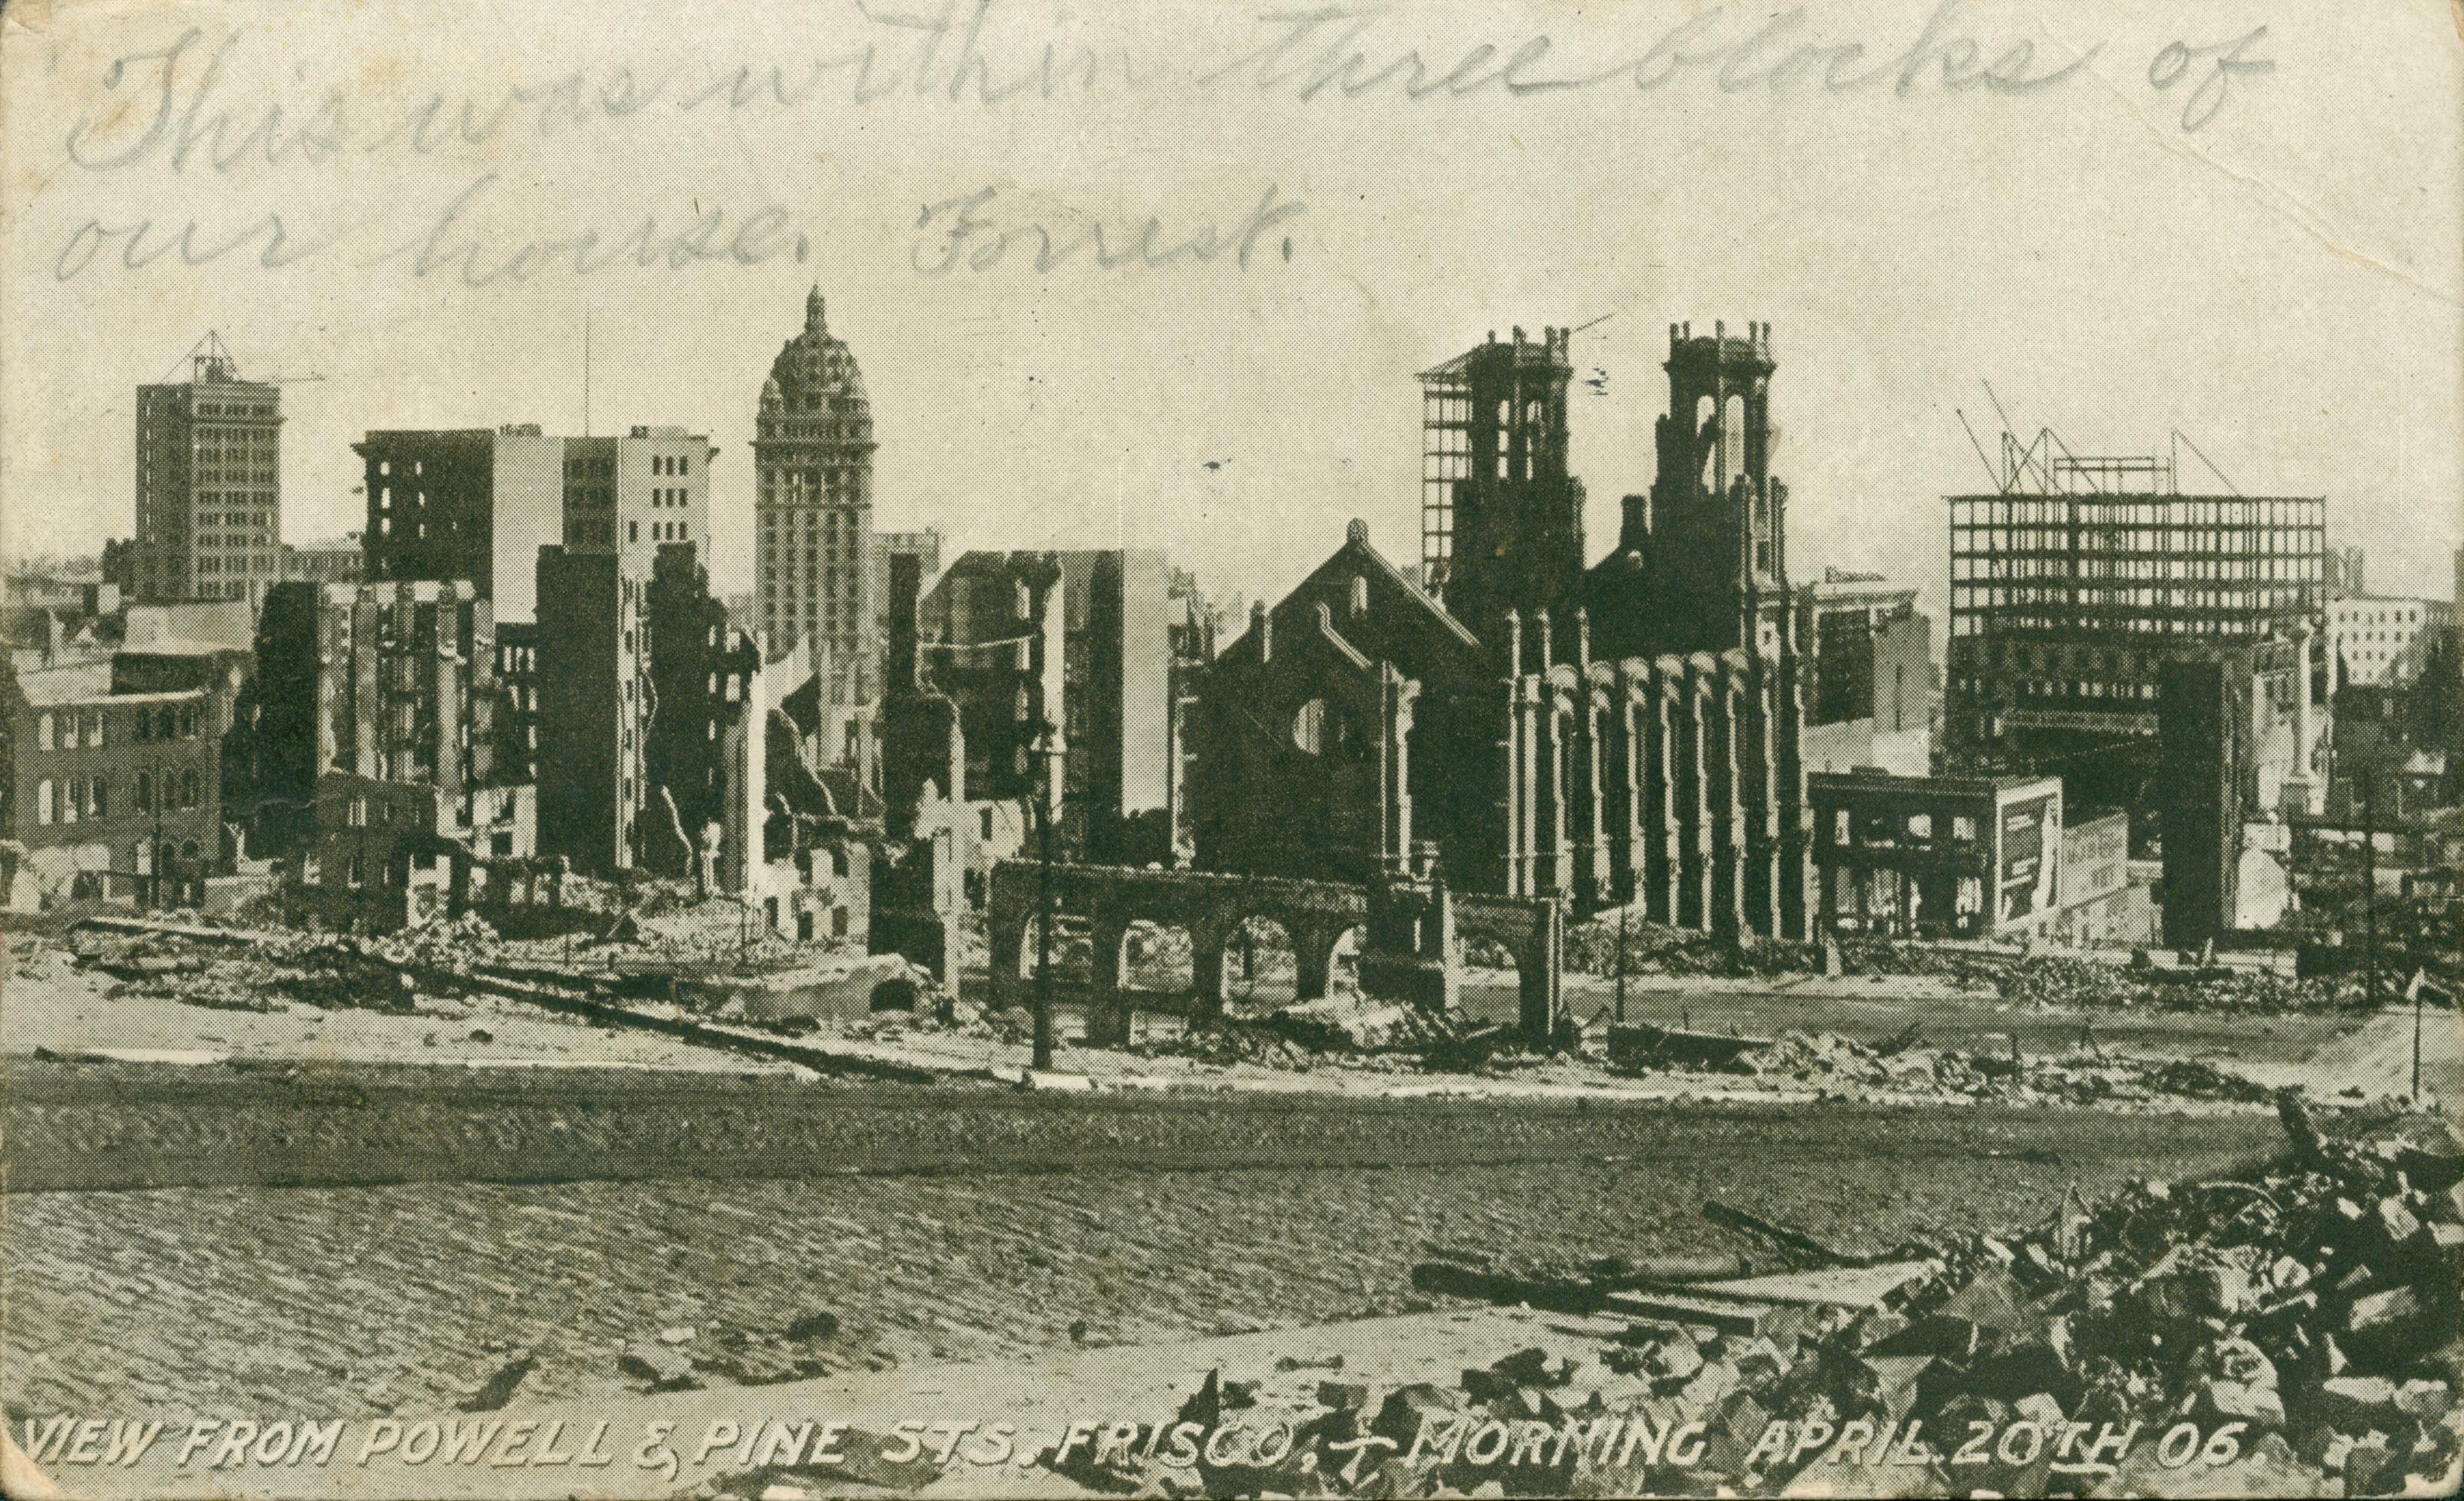 Shows a panoramic view of the destruction in San Francisco from Powell and Pine Streets.